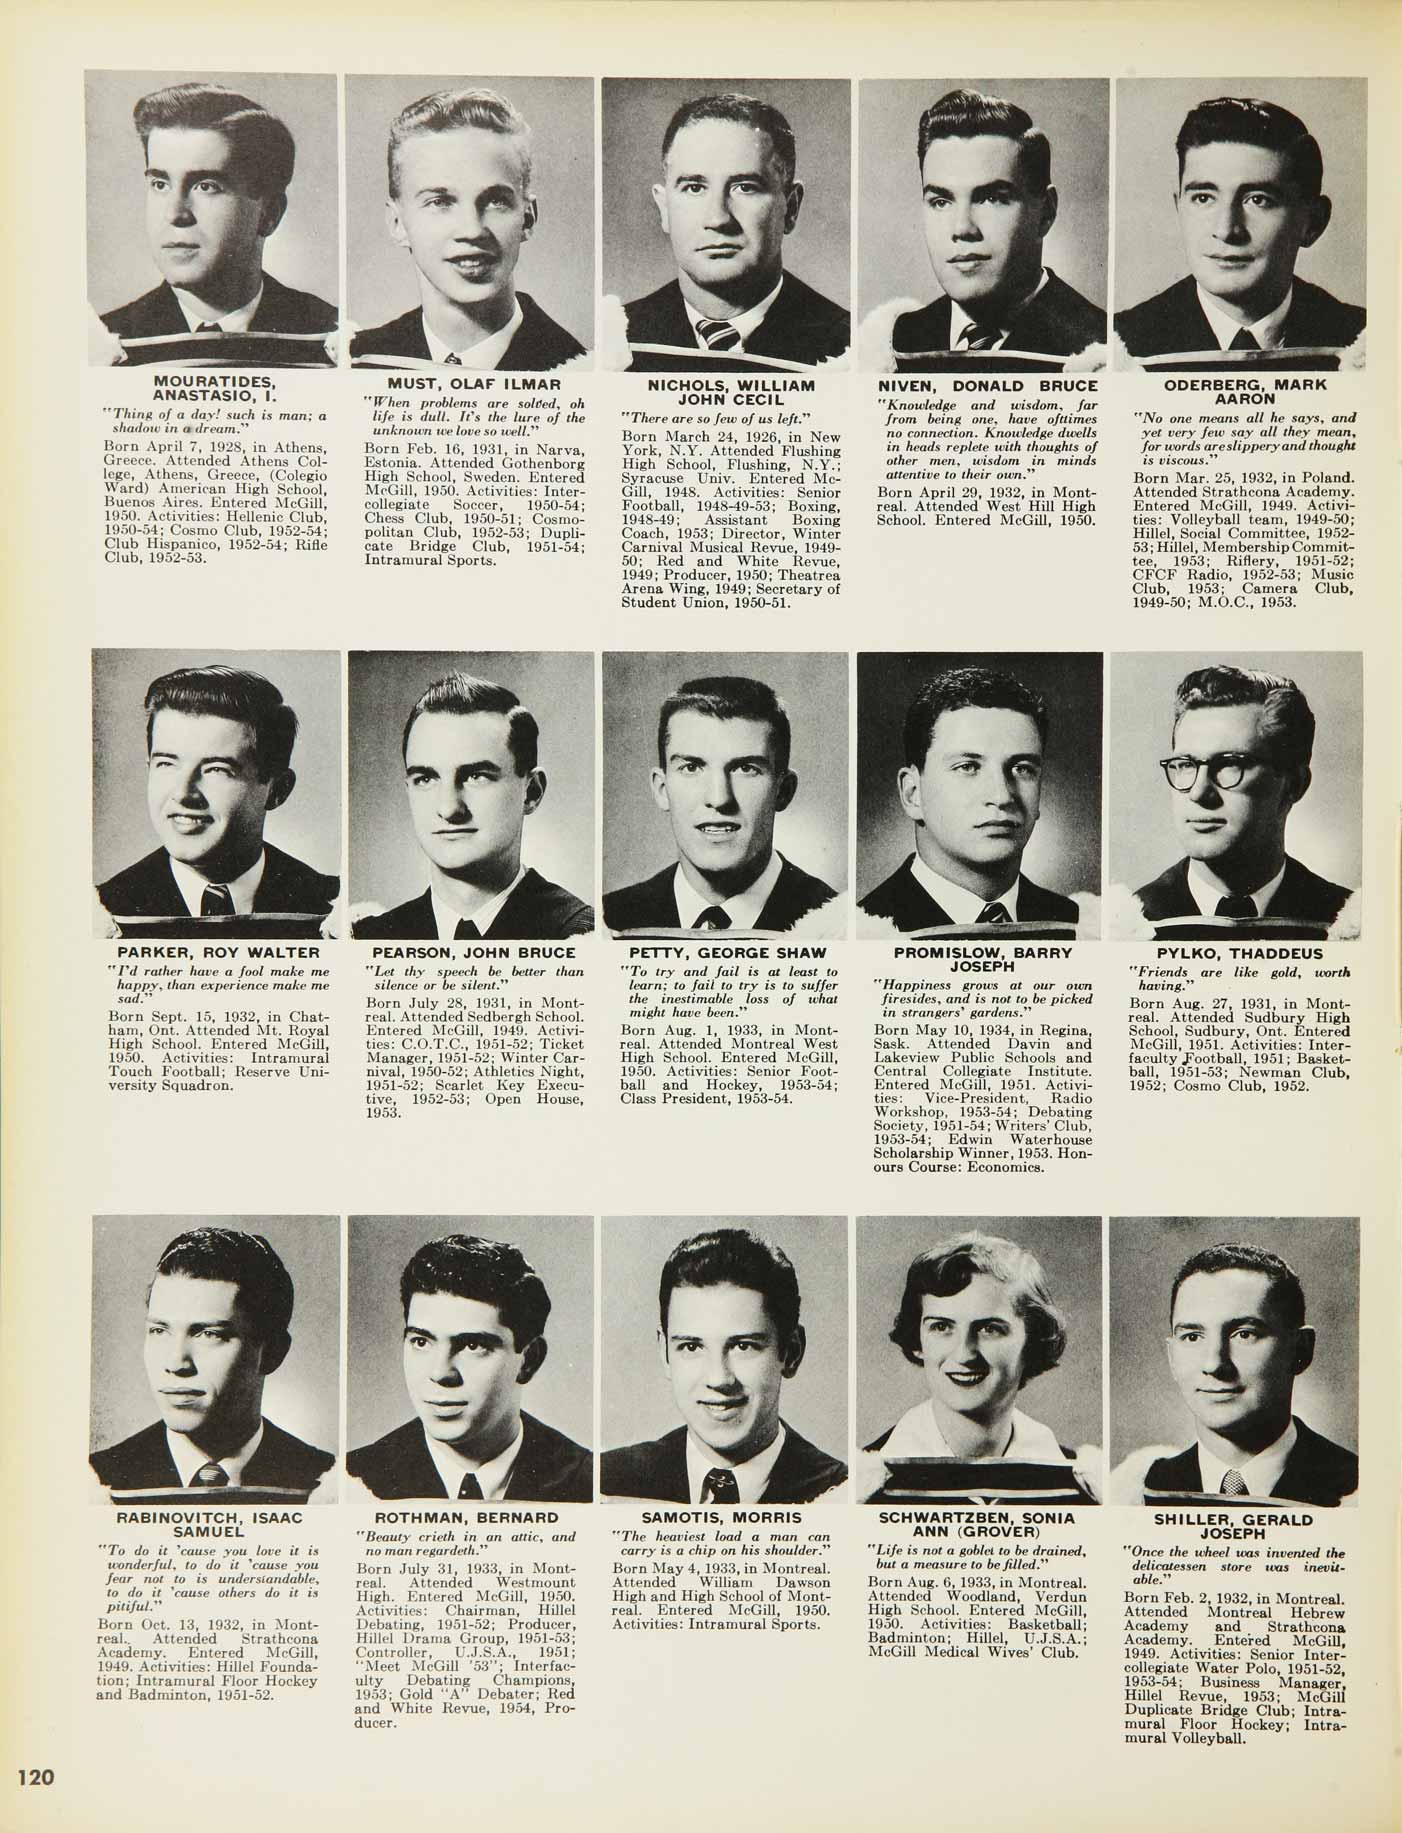 McGill Yearbook: 1954